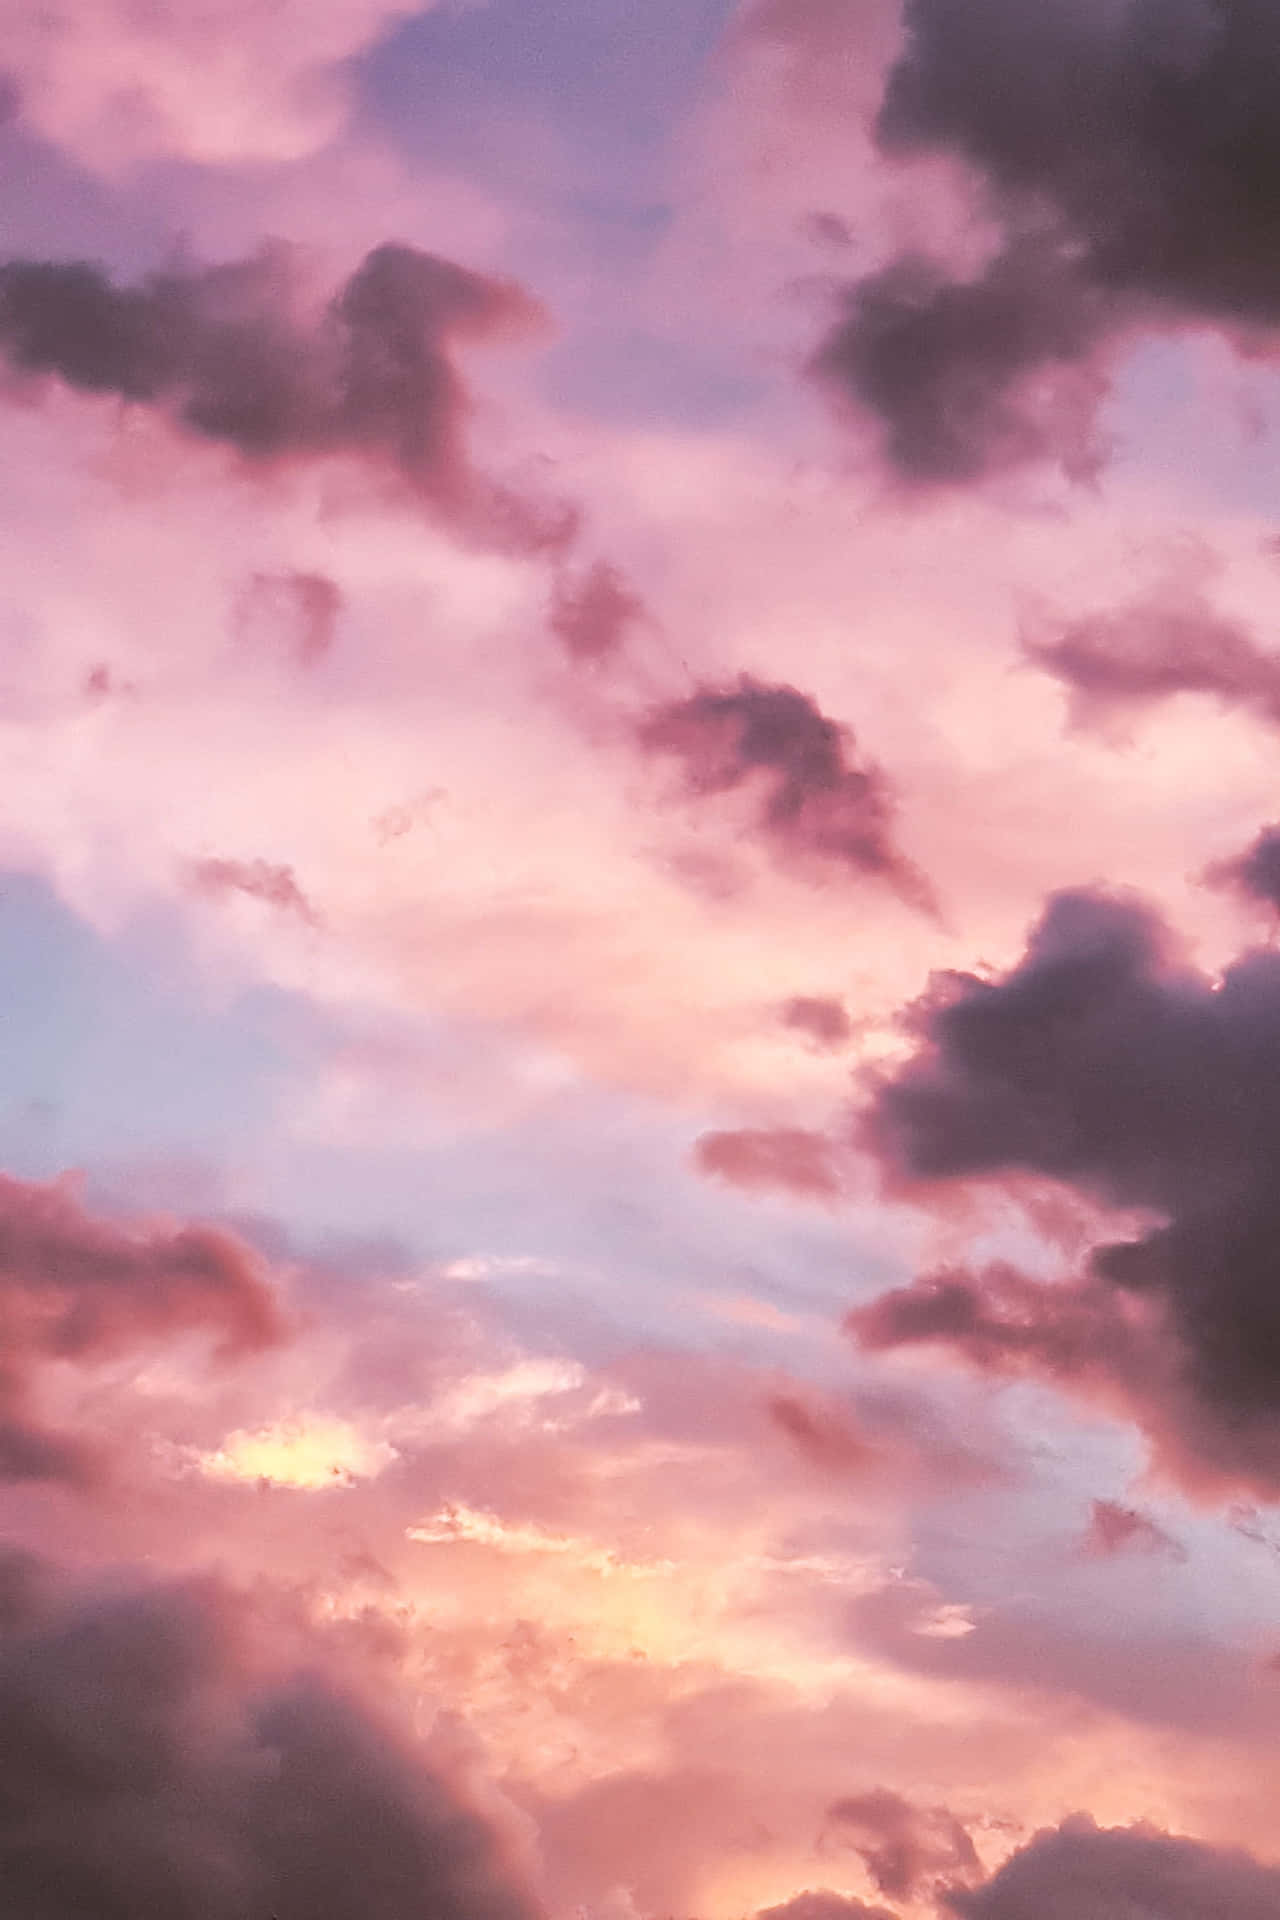 A Pink And Purple Sky With Clouds Wallpaper